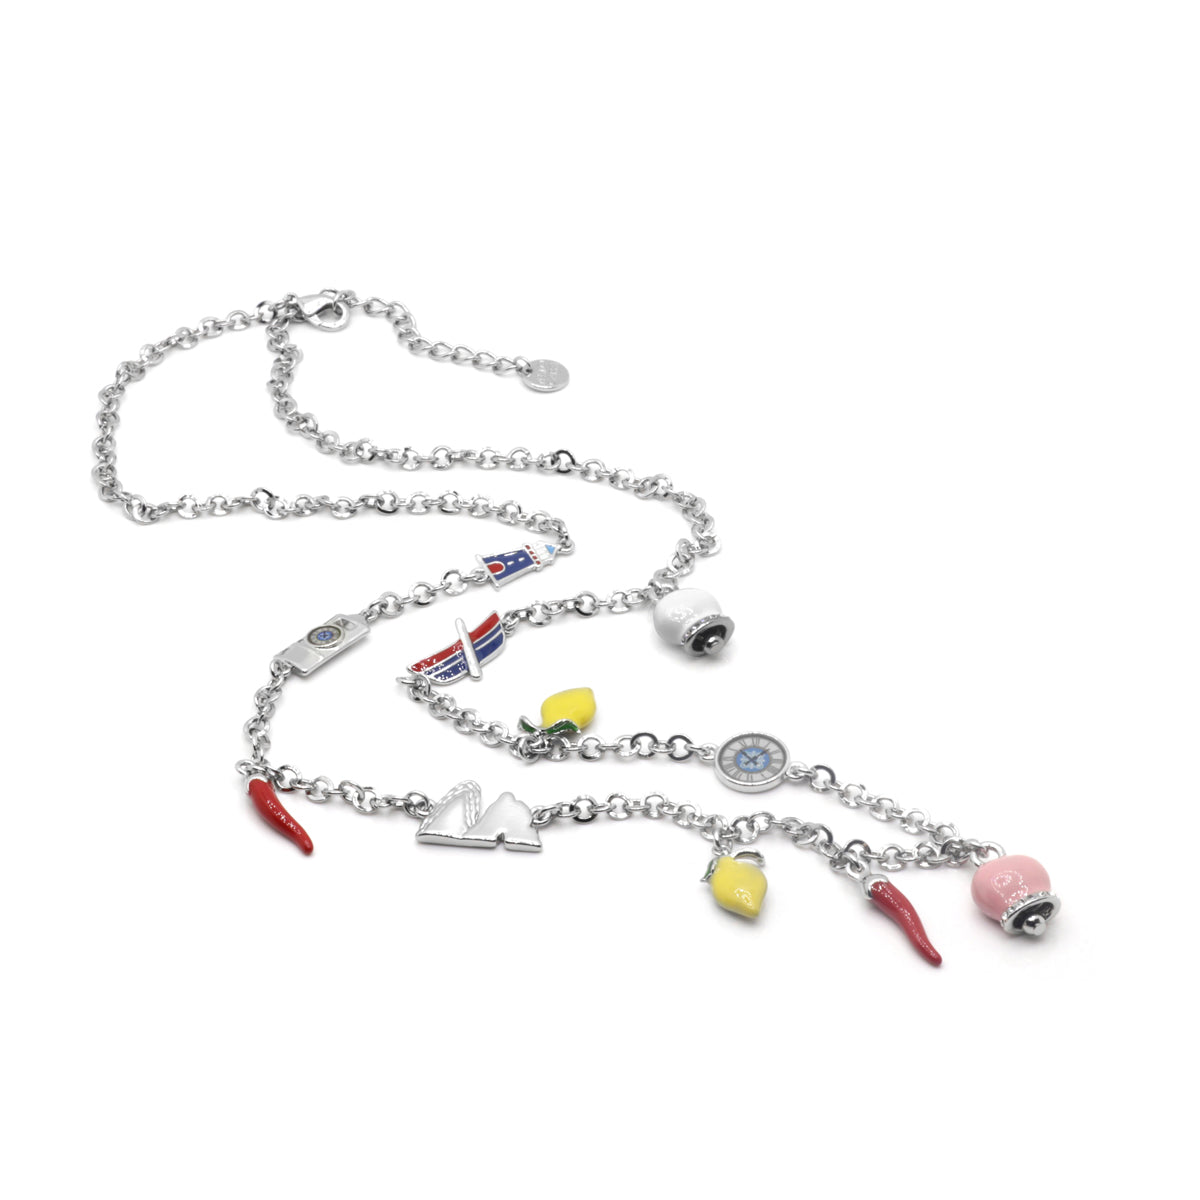 Metal necklace with charms inspired by the island of Capri, embellished with colored enamels and crystals